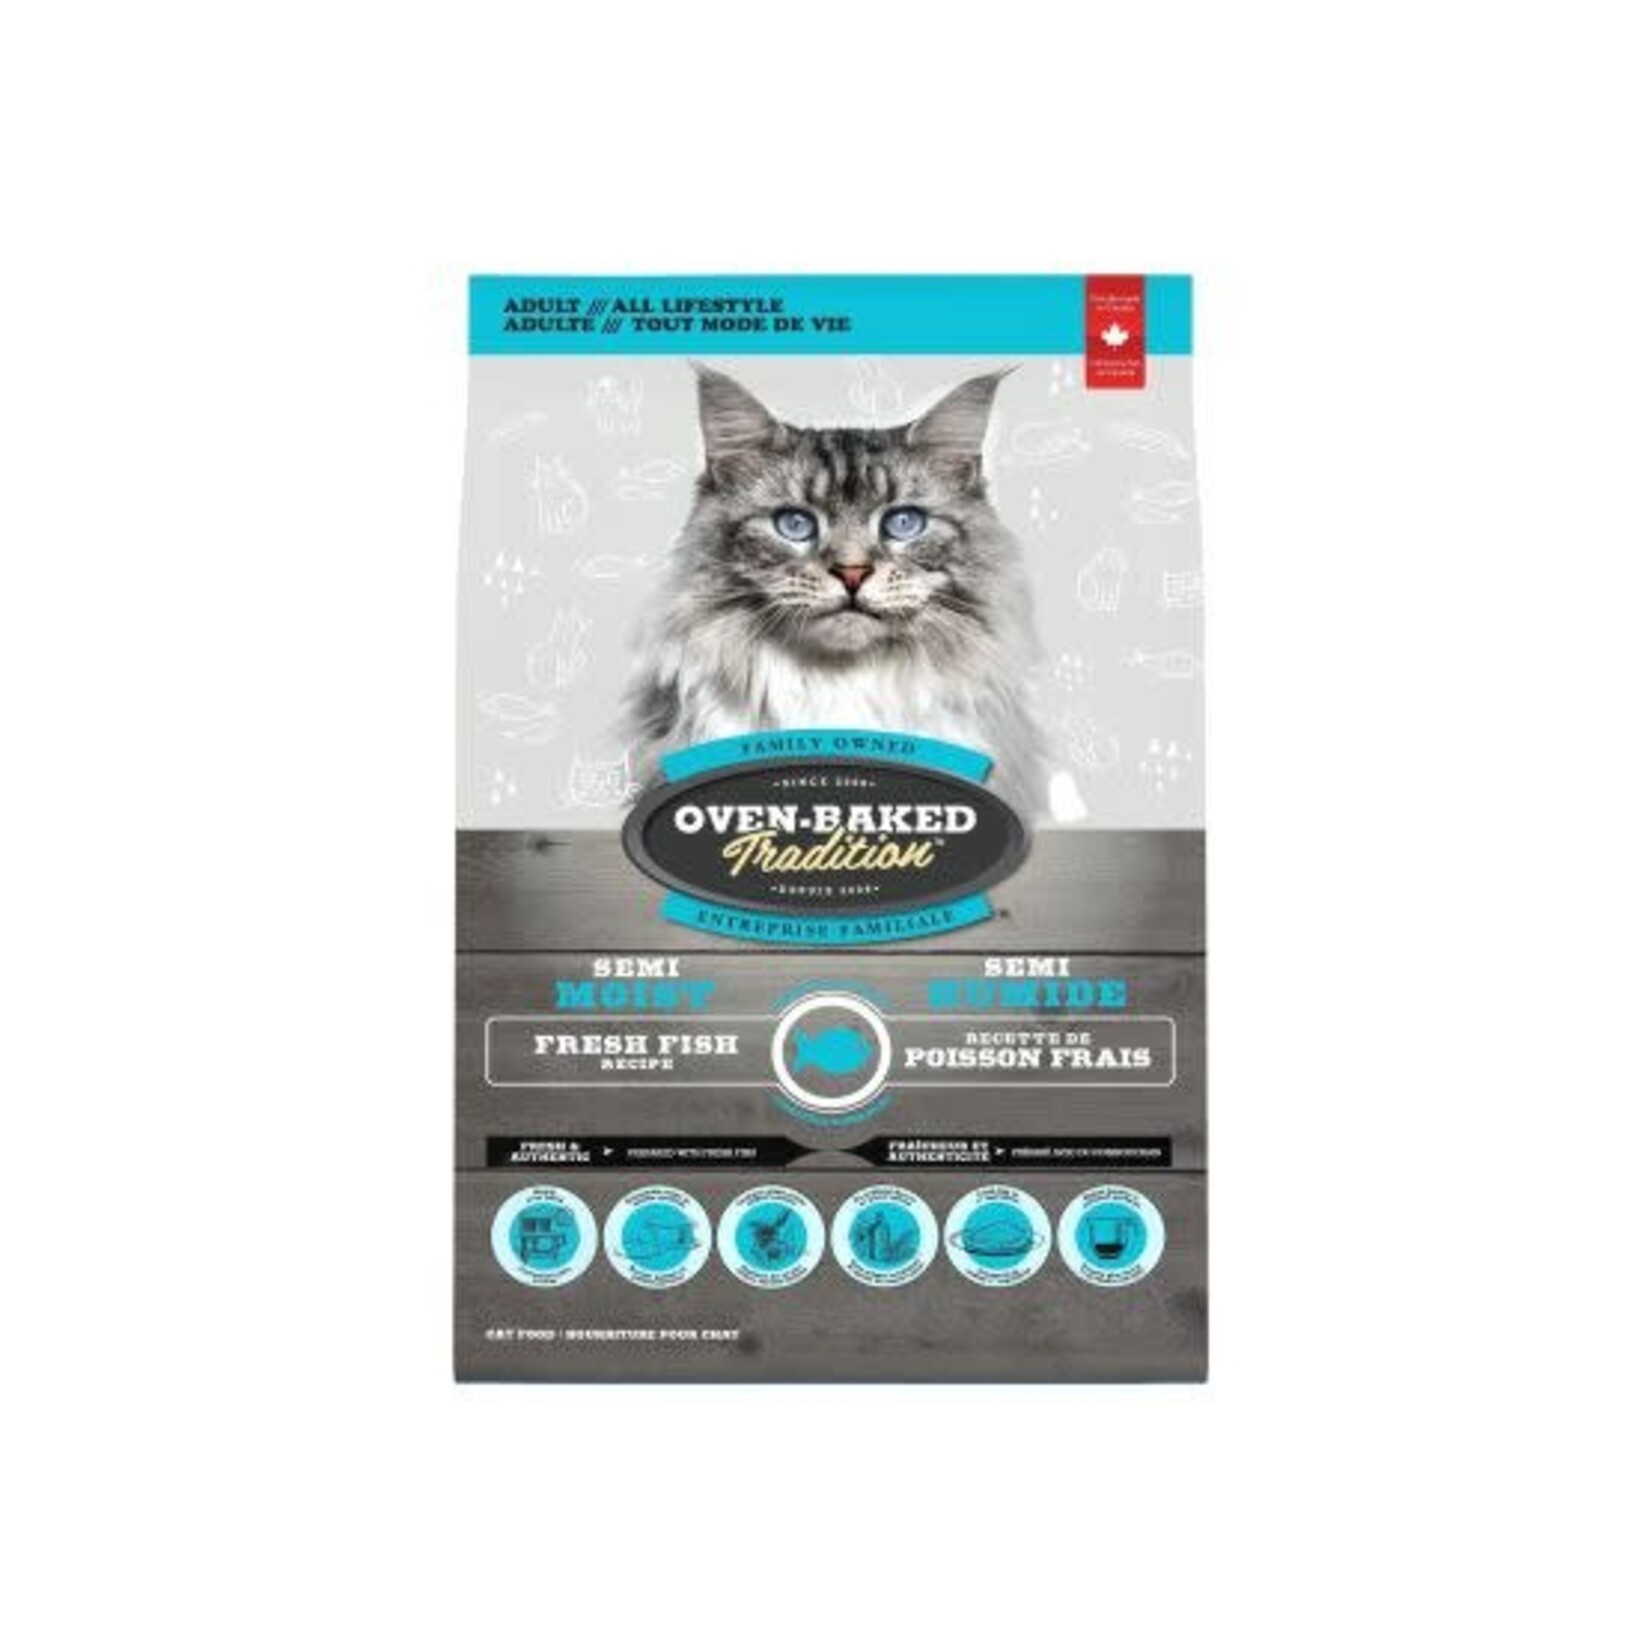 Oven-Baked Tradition Obt Nourriture Semi-humide Pour Chat - Poisson 3 Lbs